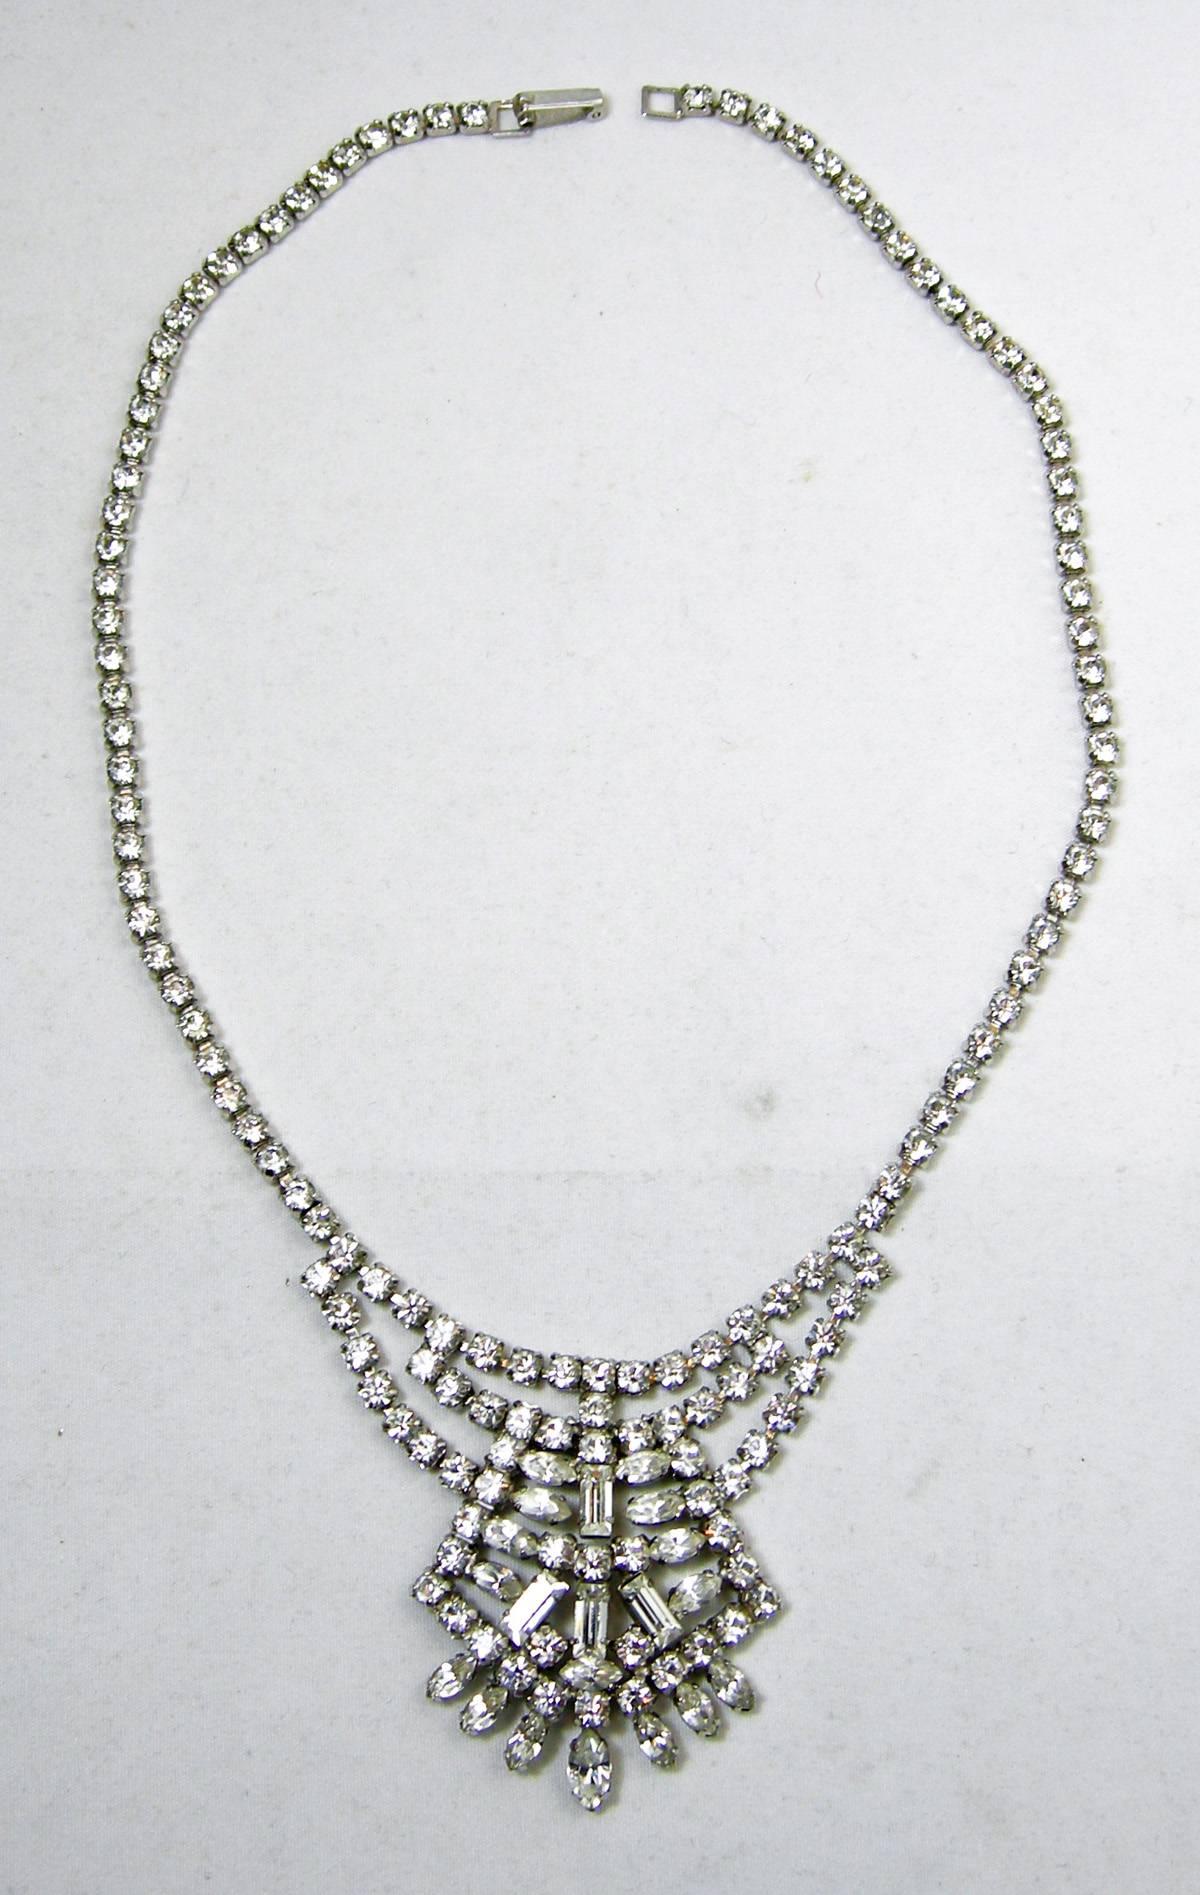 This stunning 1960s vintage necklace has a centerpiece that has a combination of teardrop, round and baguette shaped rhinestones. It is designed in a silver tone setting and measures 15”. The centerpiece measures 2” x 2-1/2”. It is in excellent